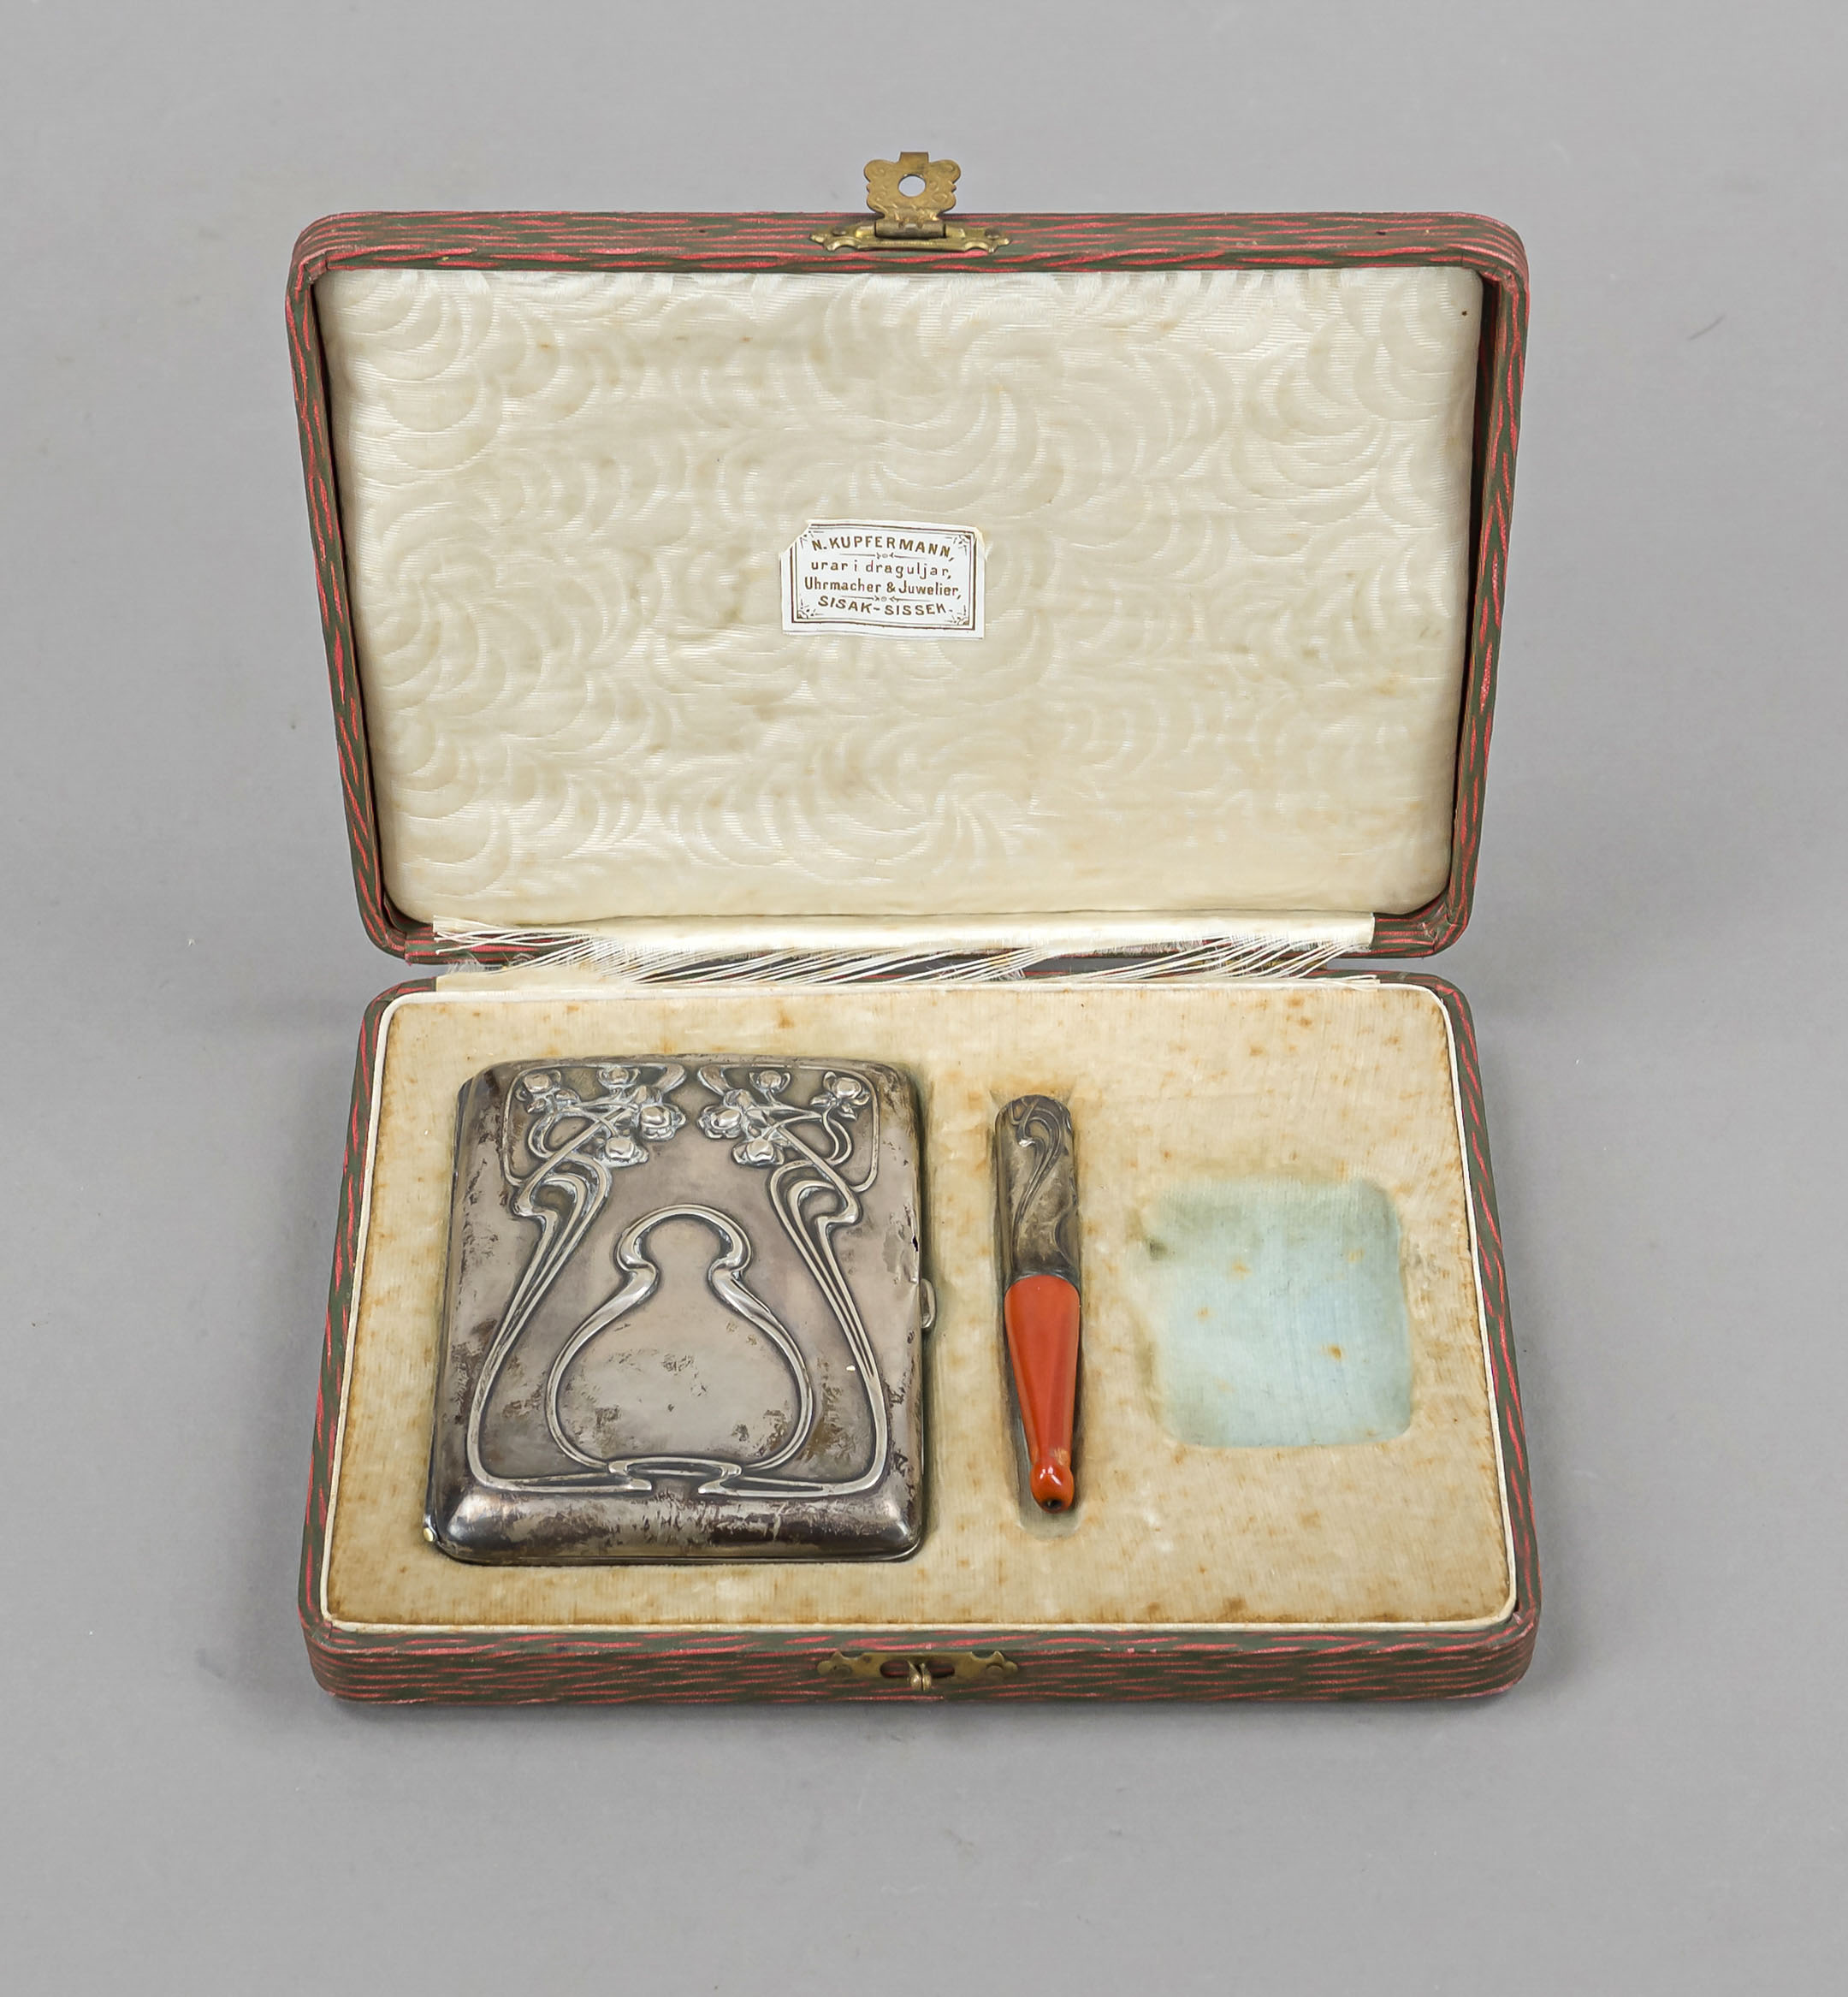 Two parts of an Art Nouveau smoking set, German, c. 1900, silver 800/000, cigarette case and holder,